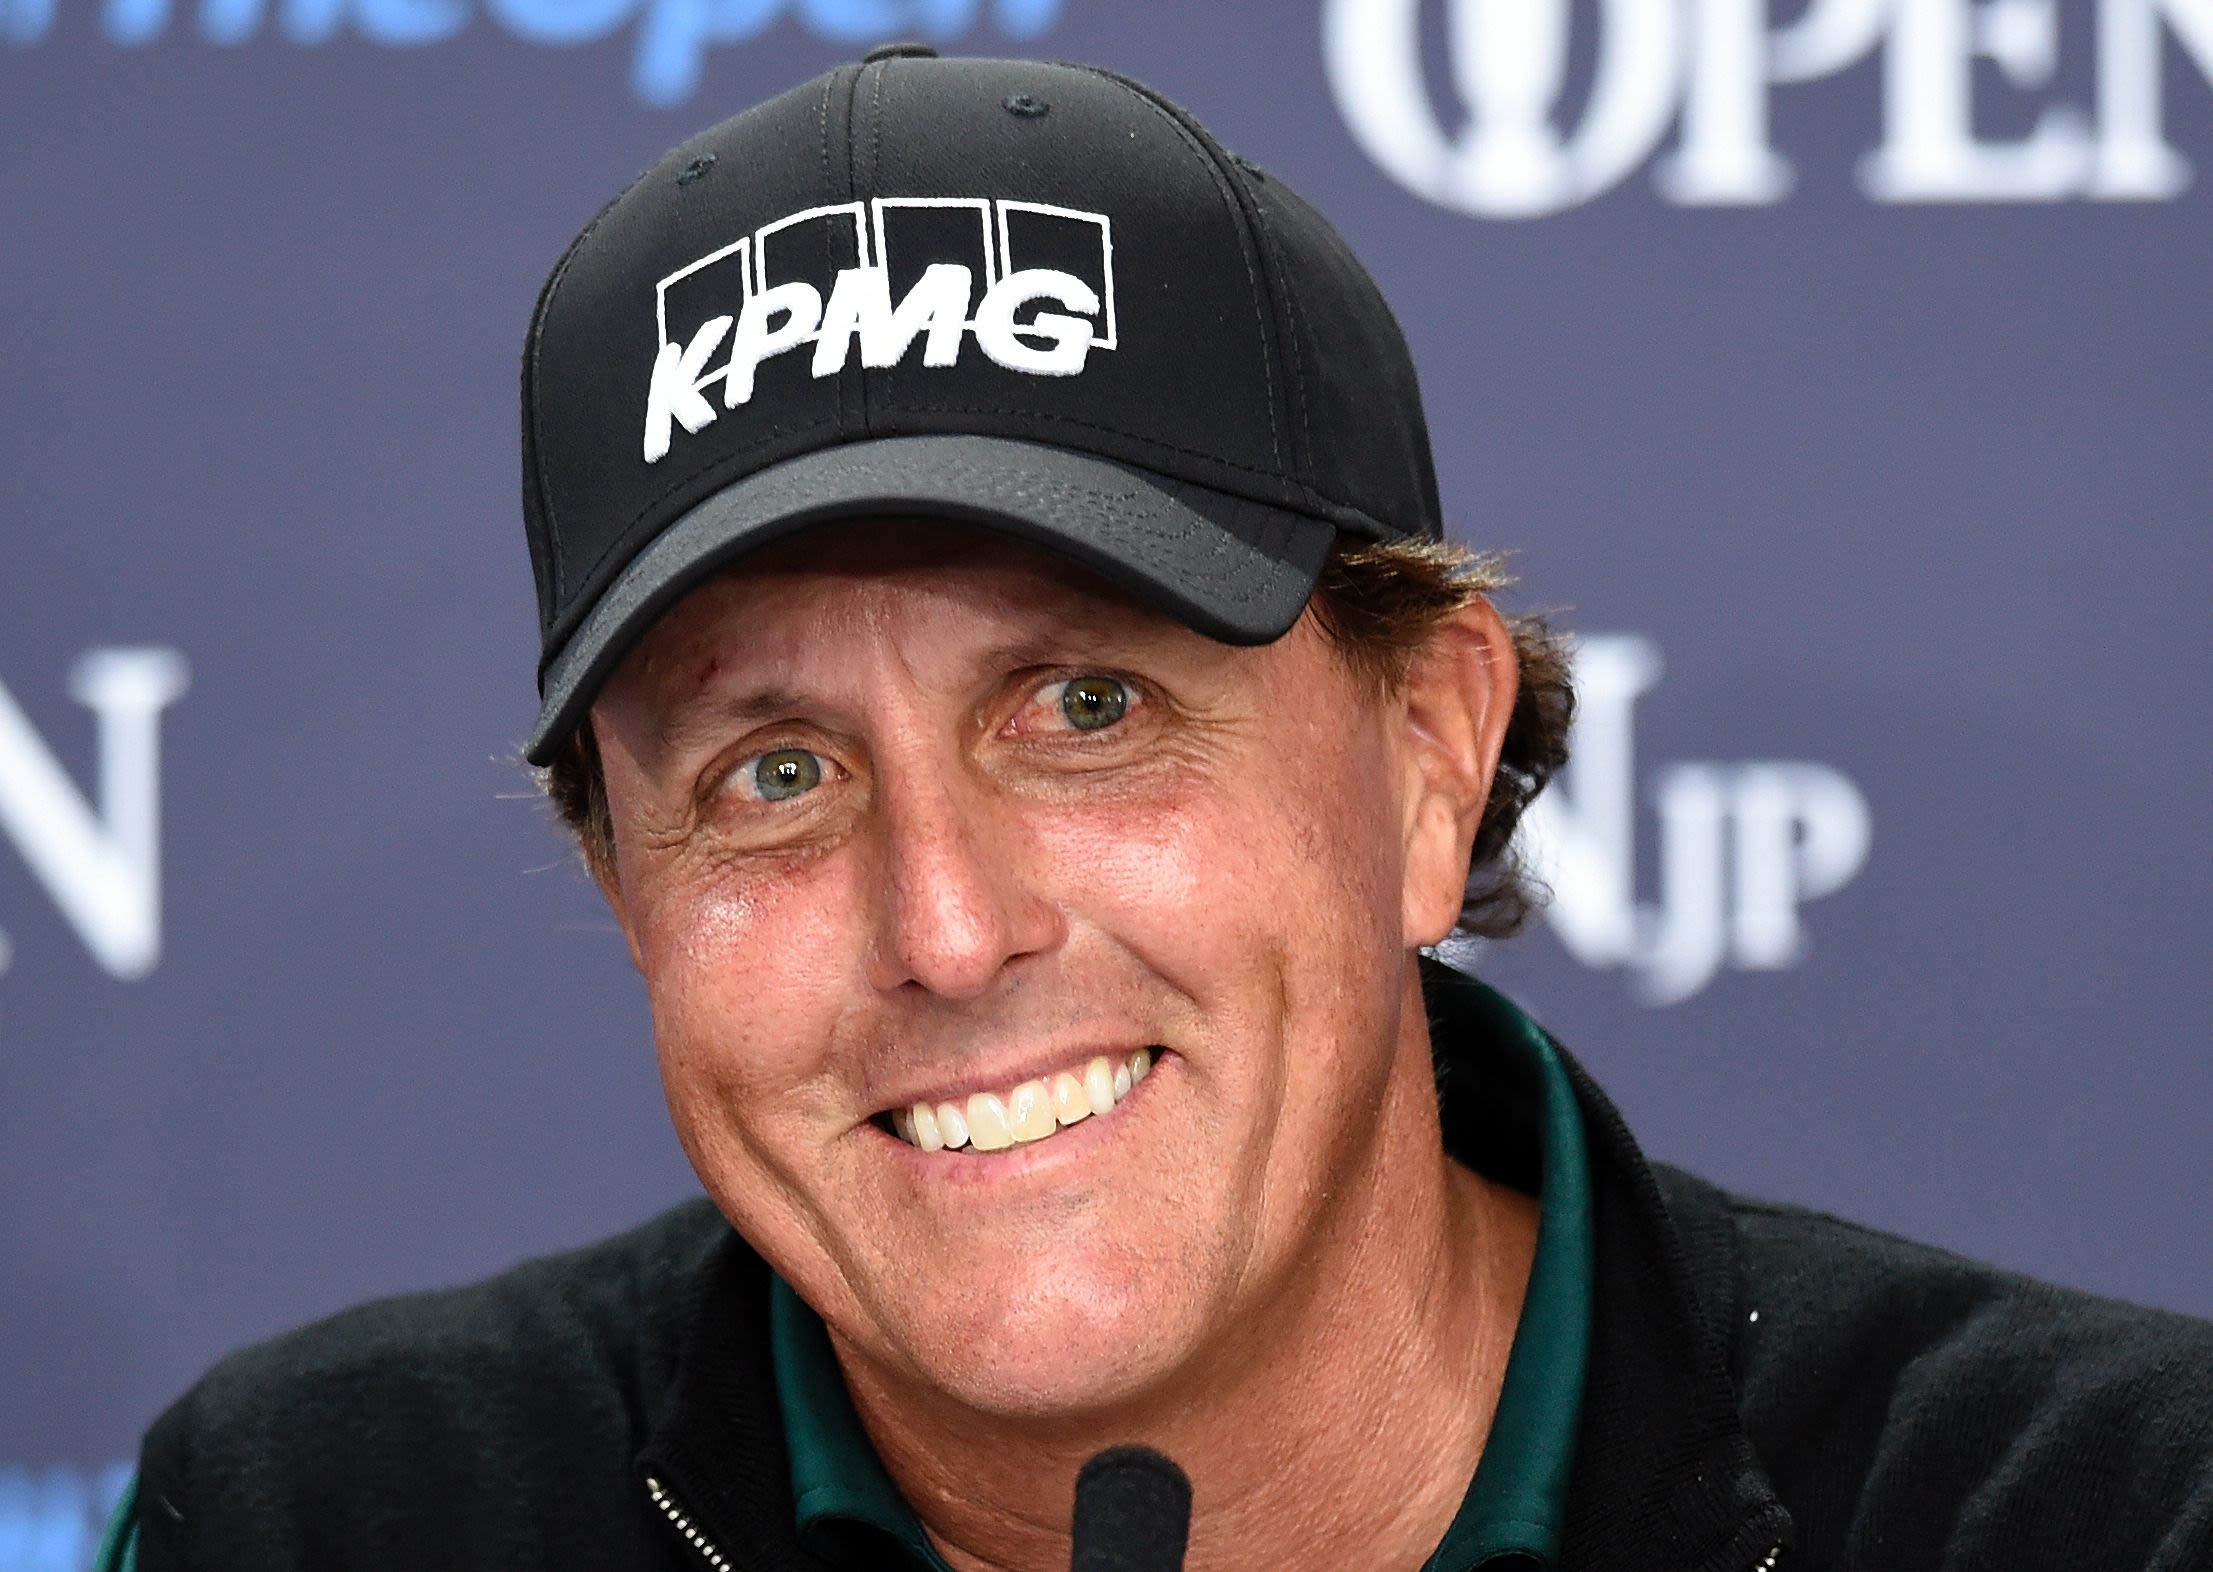 Phil Mickelson chasing fourth Masters and eyeing grand slam dream | CNN